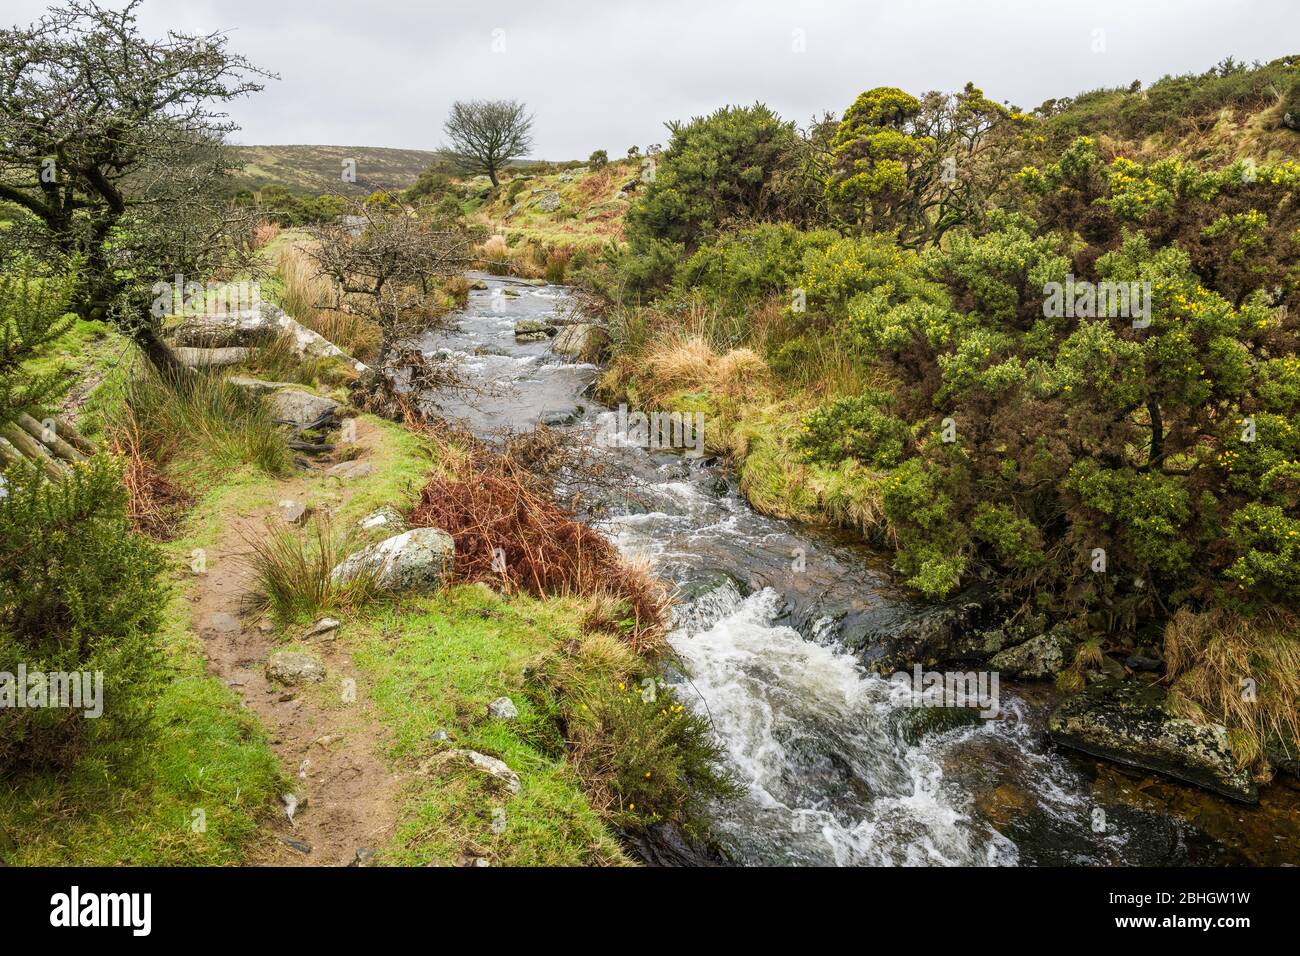 The River Lyd flows below Arms Tor and Brat Tor in Dartmoor National Park, Devon, England, UK. Stock Photo